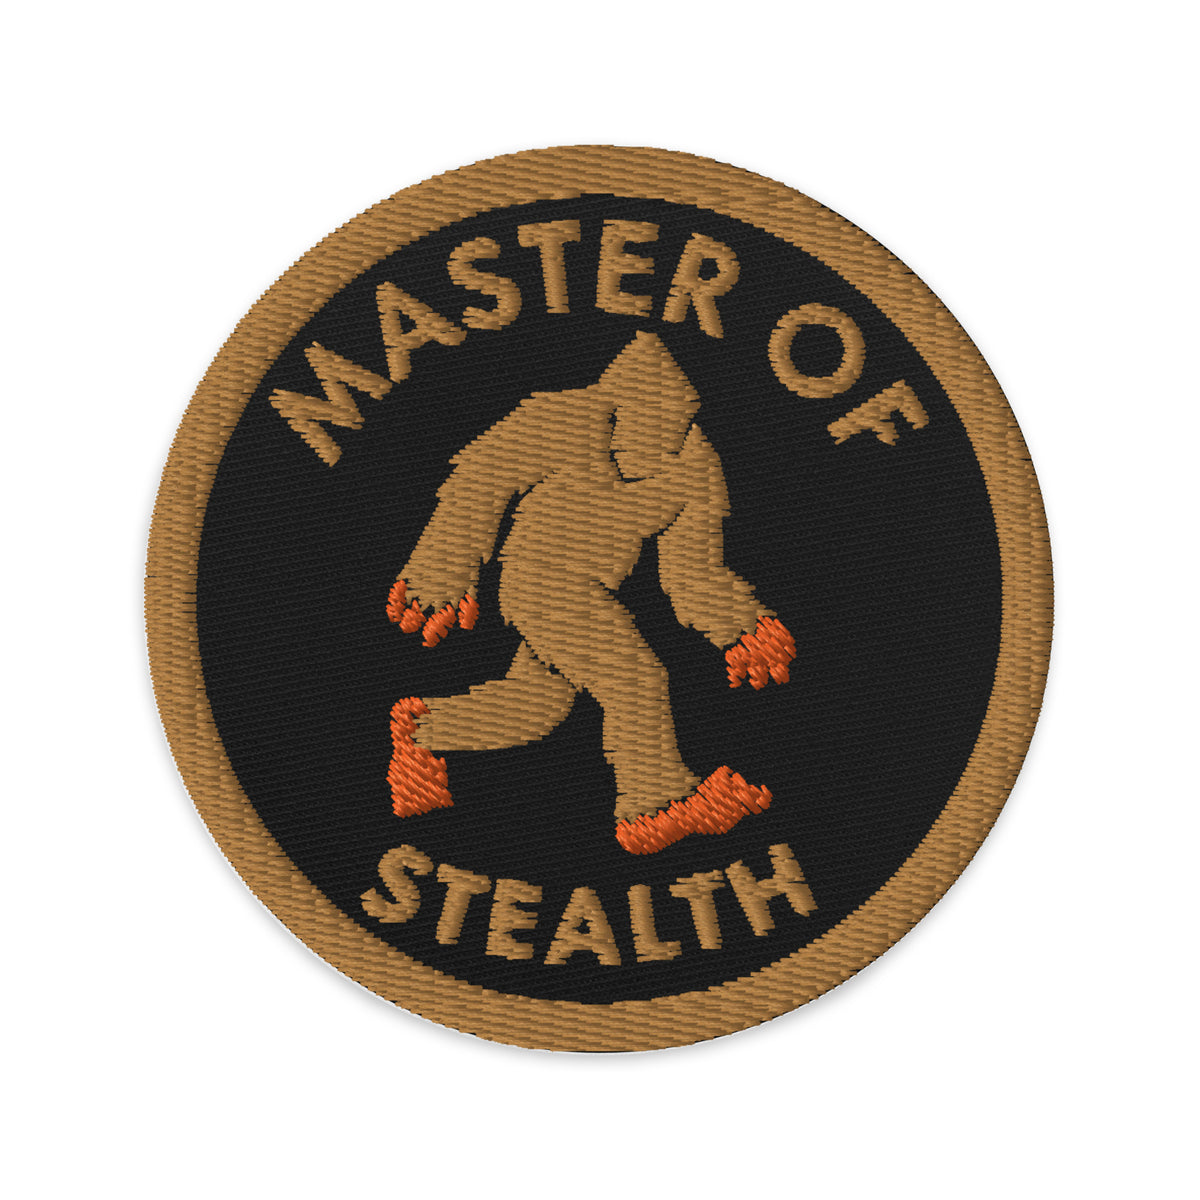 Master of Stealth Bigfoot Patch